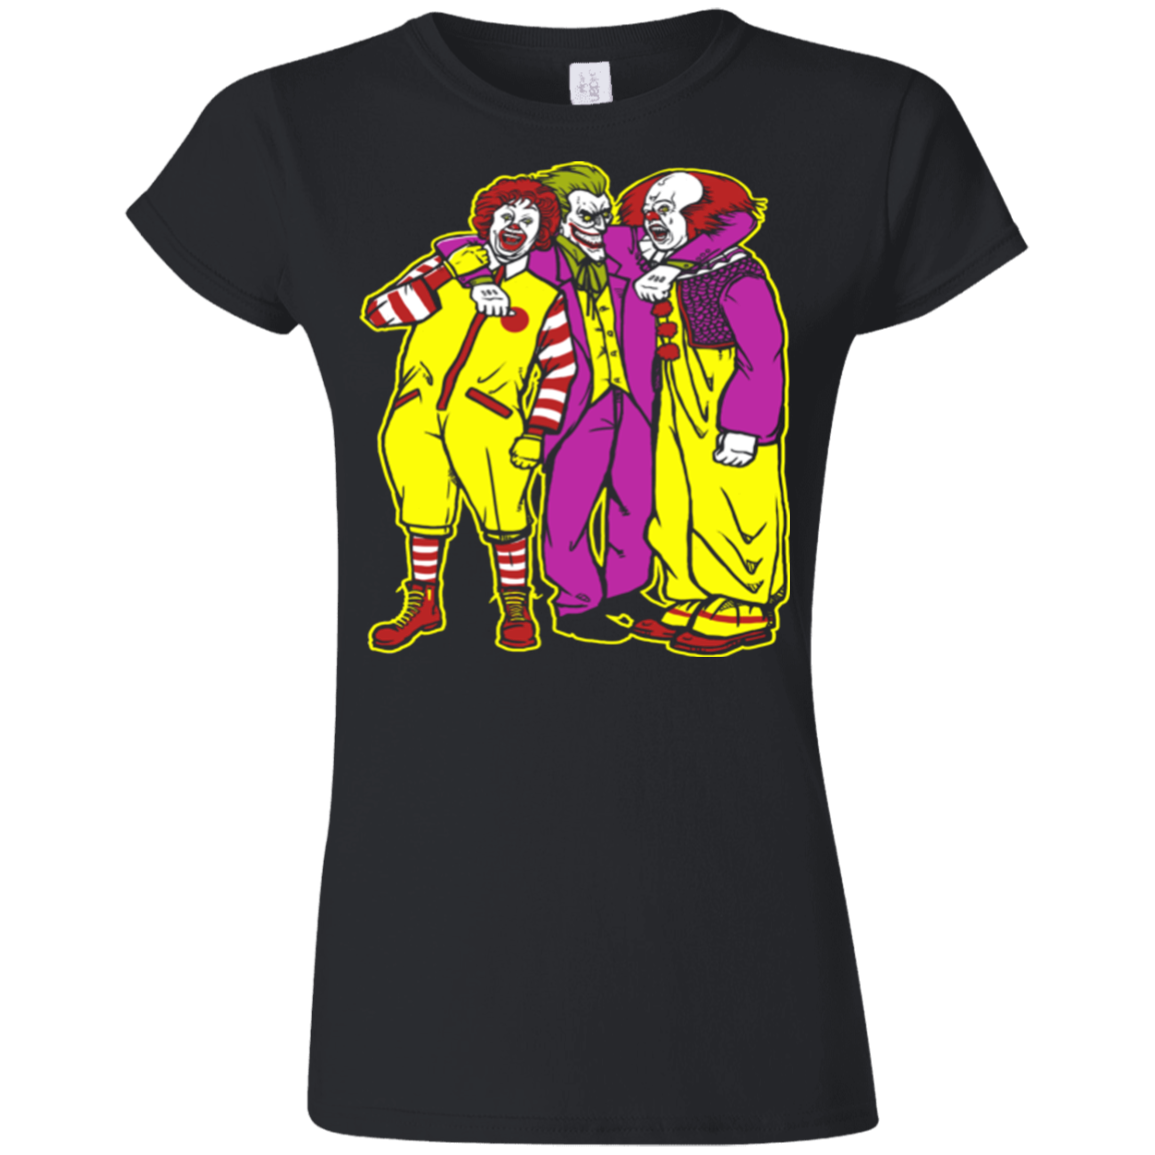 Whos Laughing Now Junior Slimmer-Fit T-Shirt